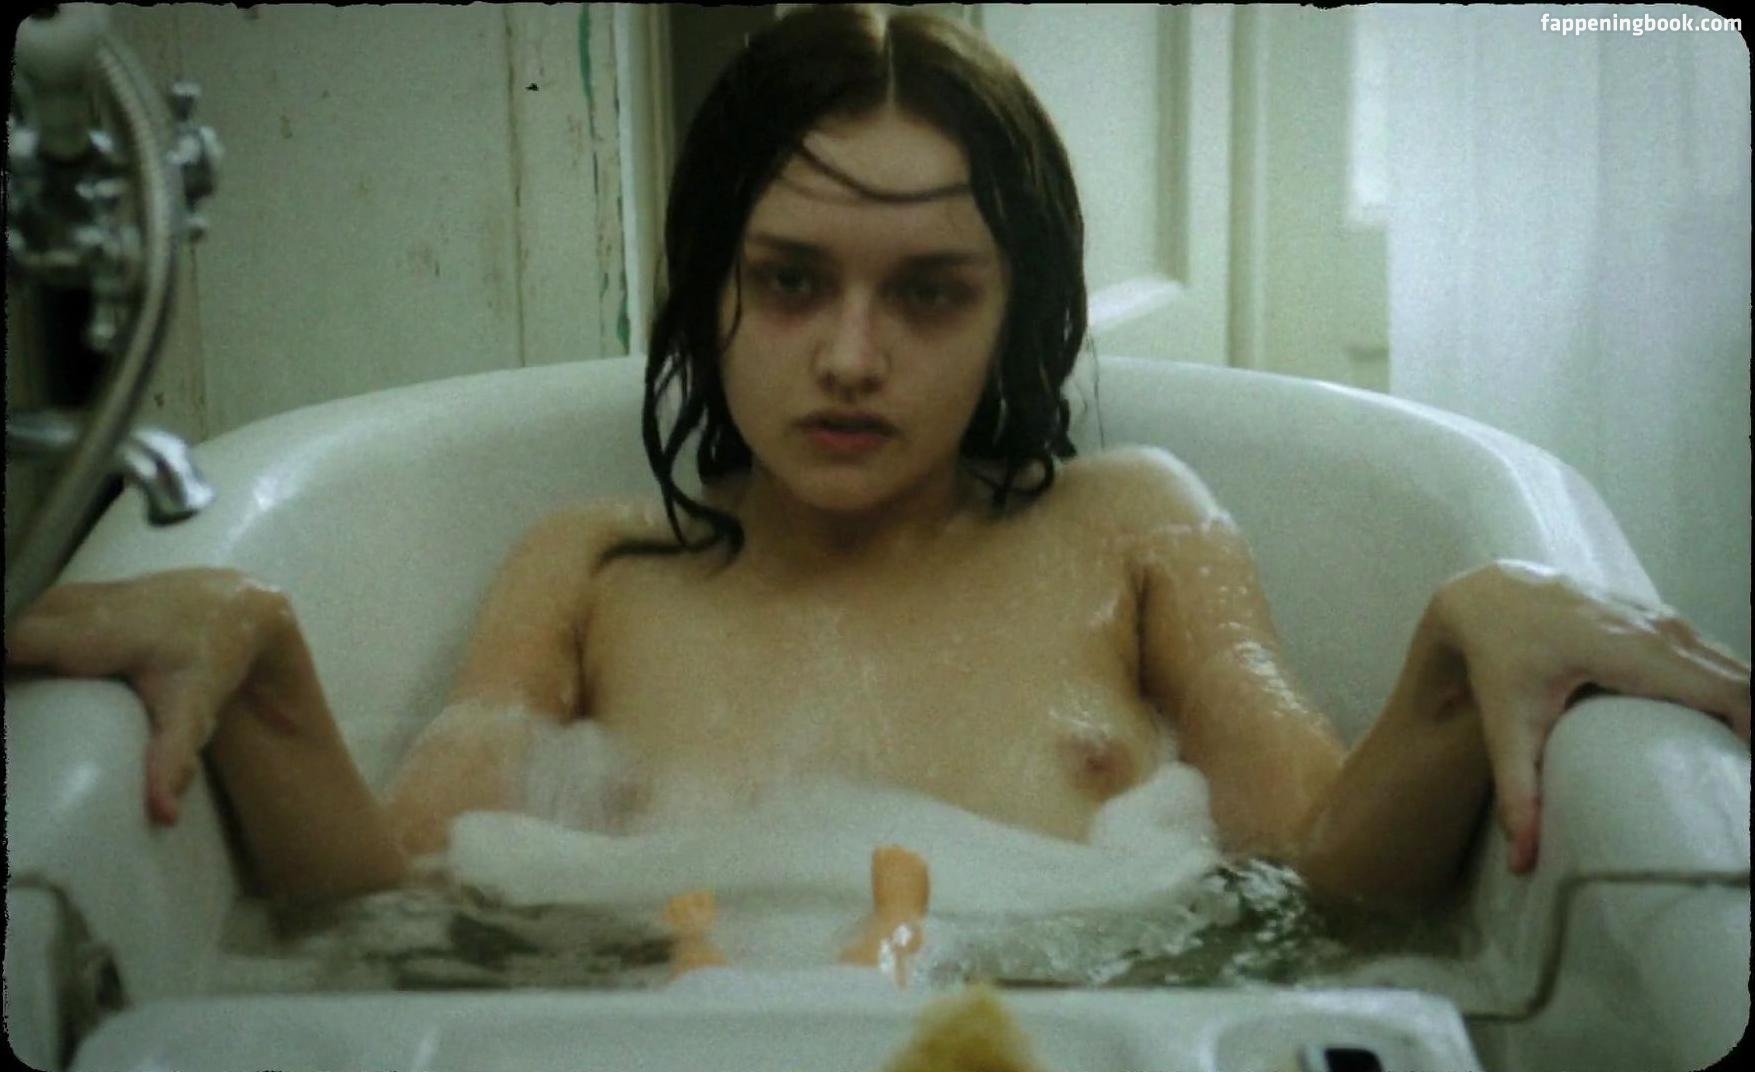 Page 1 of 2. Olivia Cooke Nude Photos. 